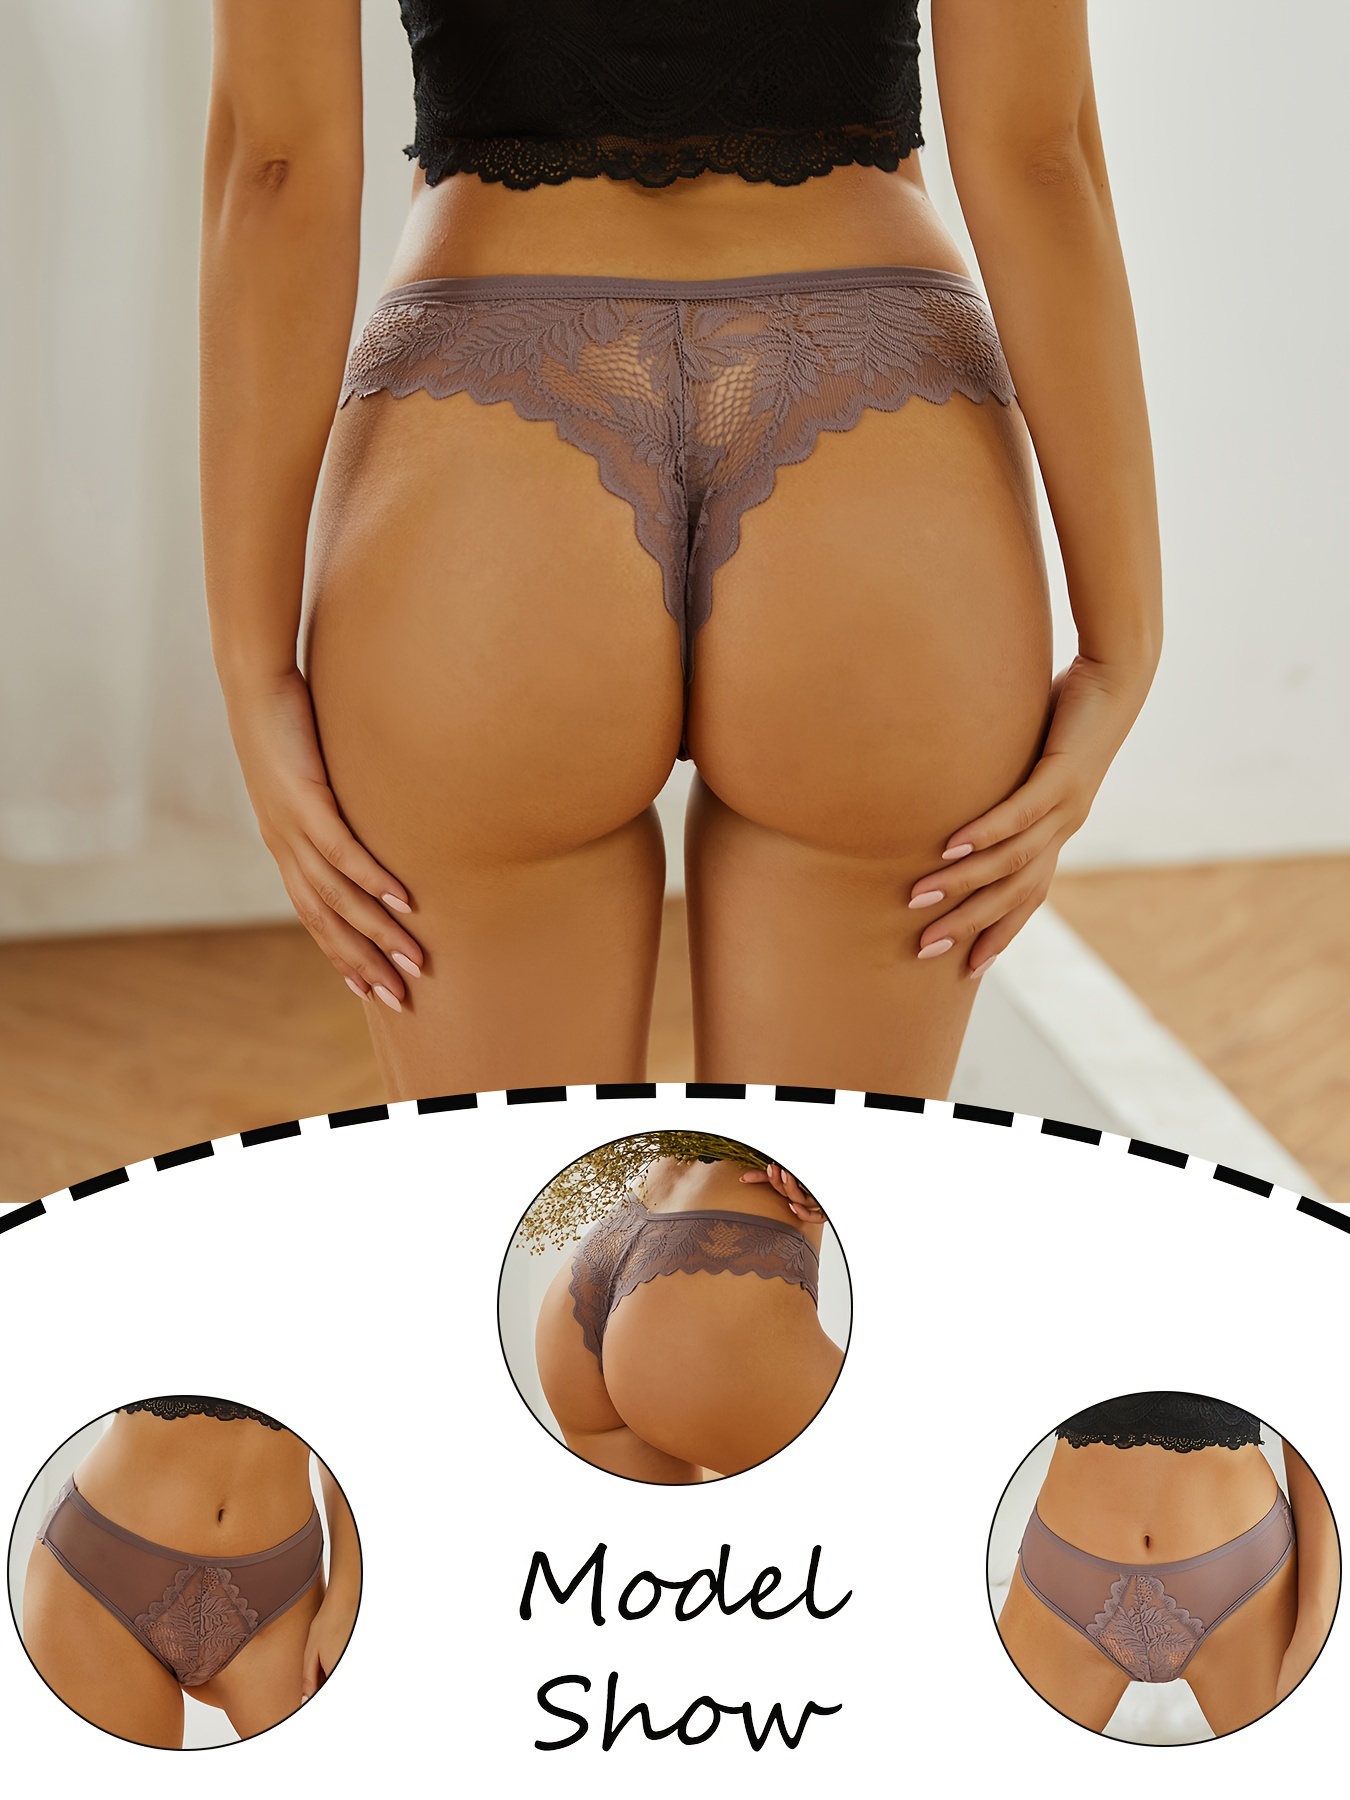 Beige Brown Tan Lace Thong Panty Sheer G-String Lingerie Sexy Underwear OS  S M L